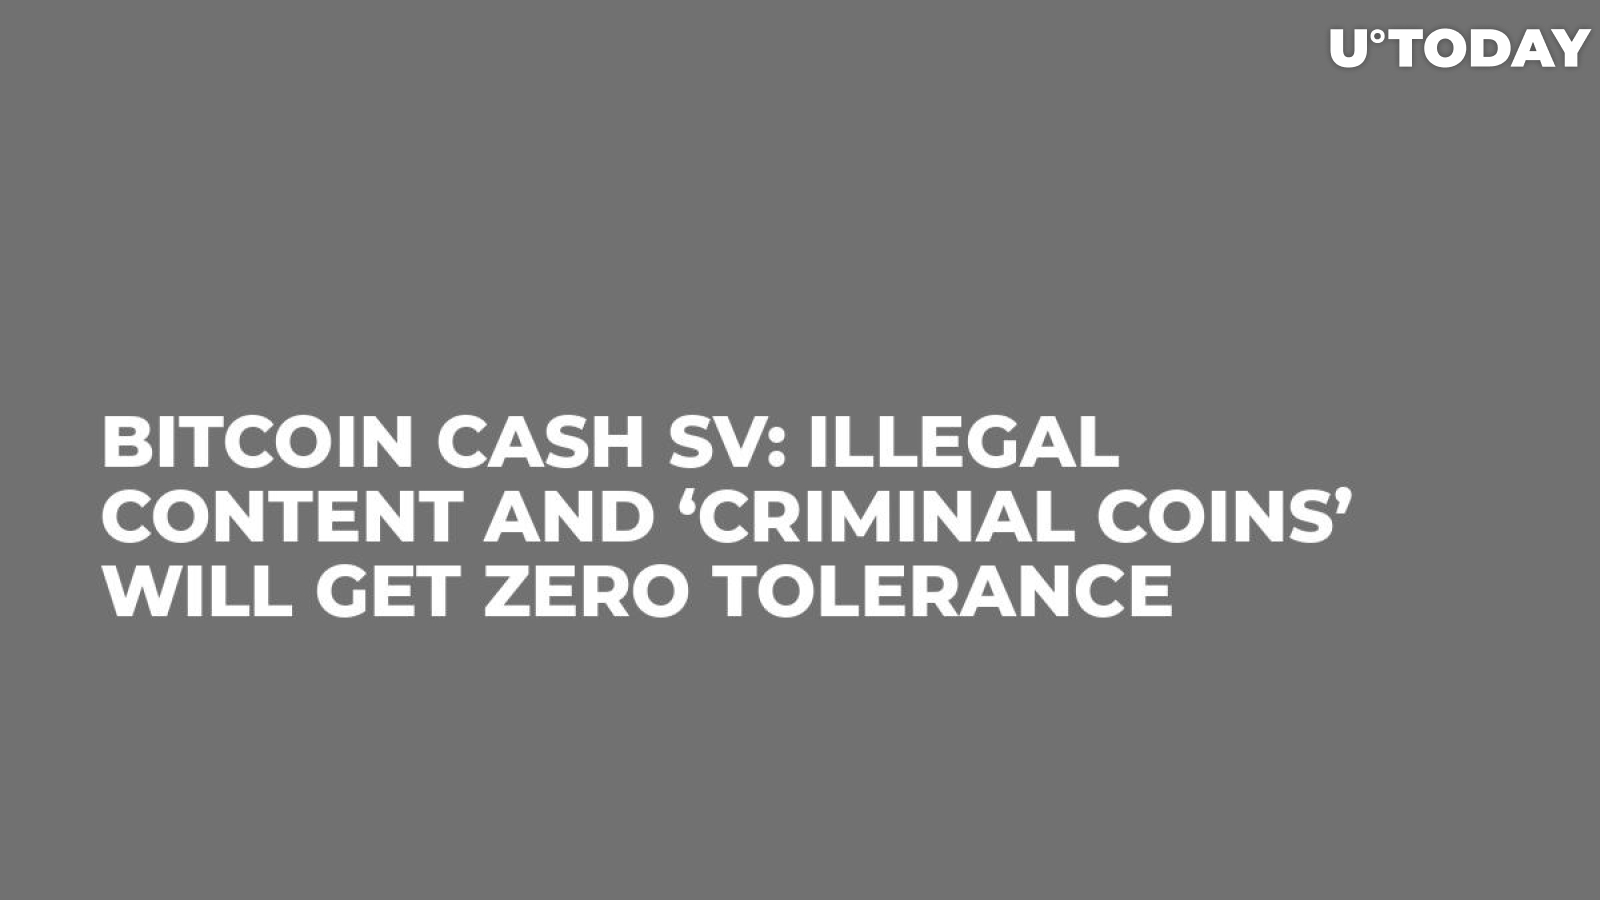 Bitcoin Cash SV: Illegal Content and ‘Criminal Coins’ Will Get Zero Tolerance